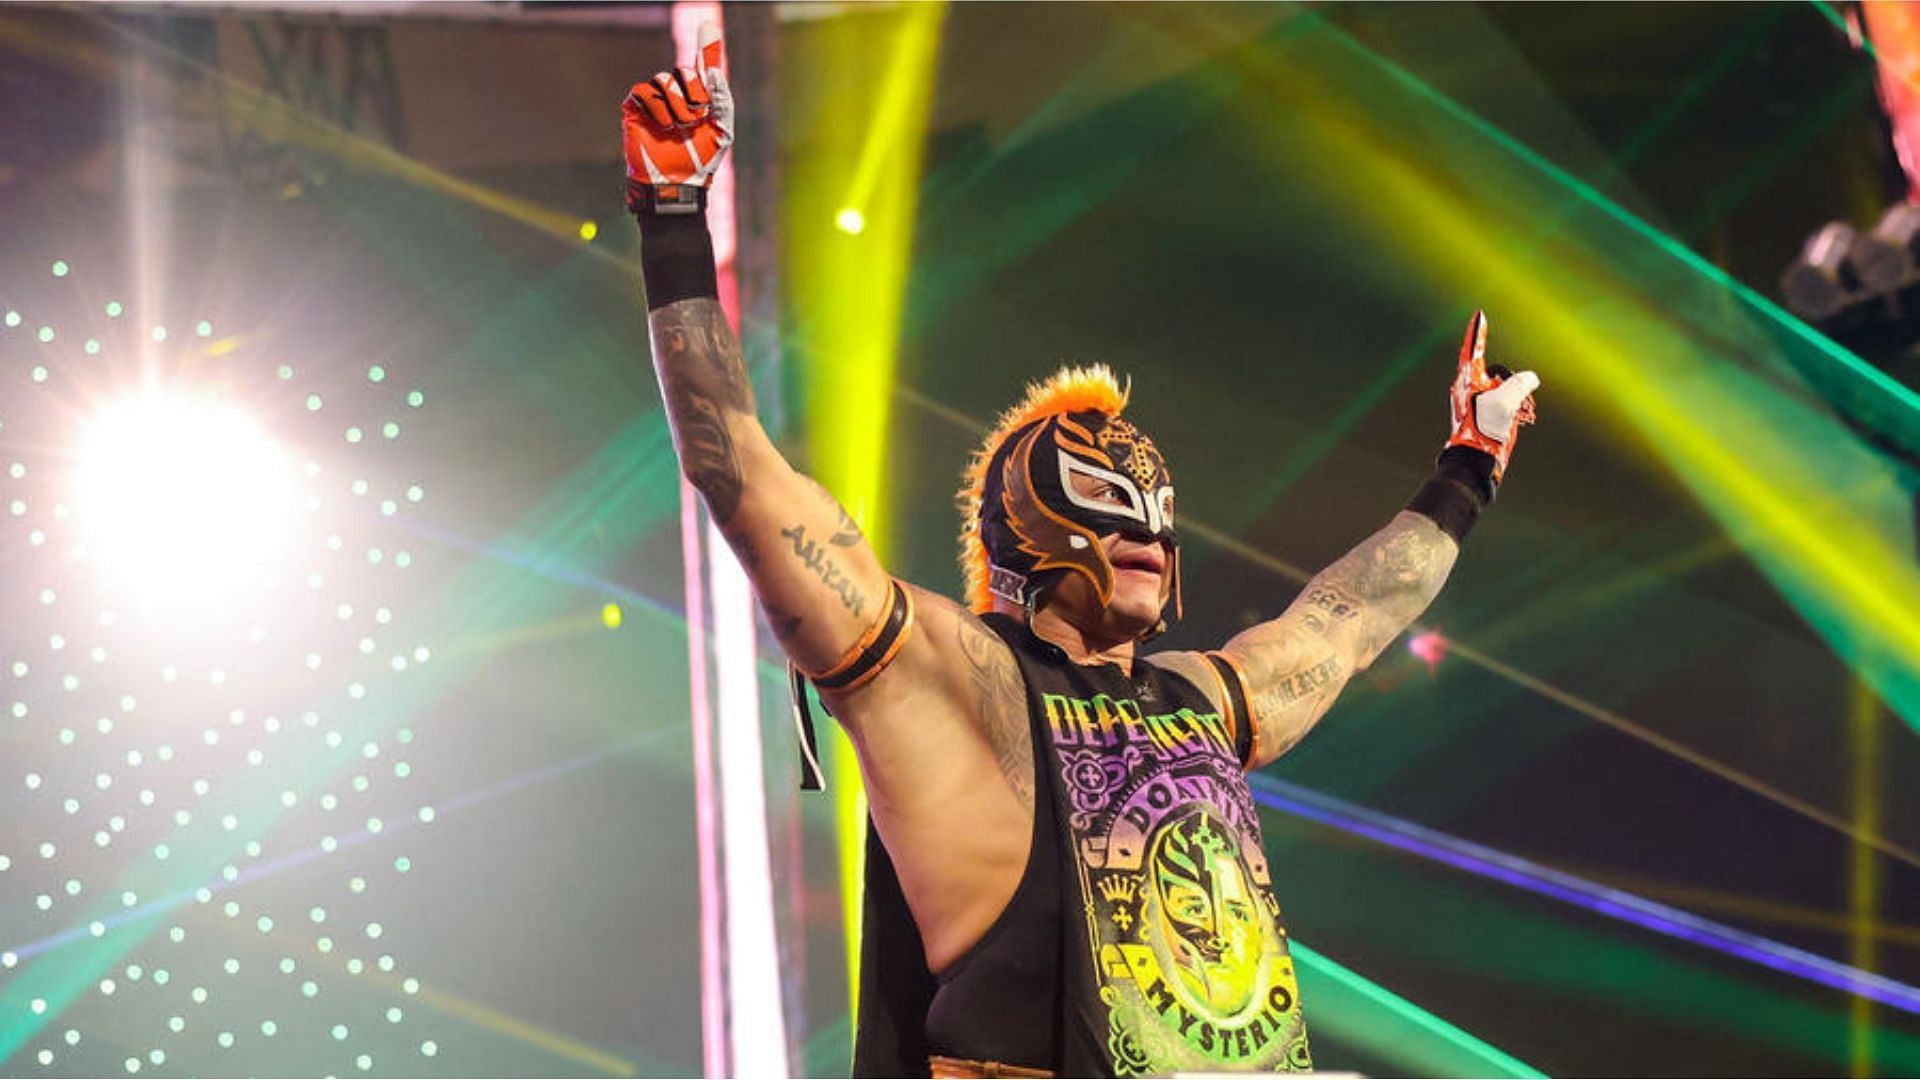 Rey Mysterio is currently a member of the SmackDown roster.